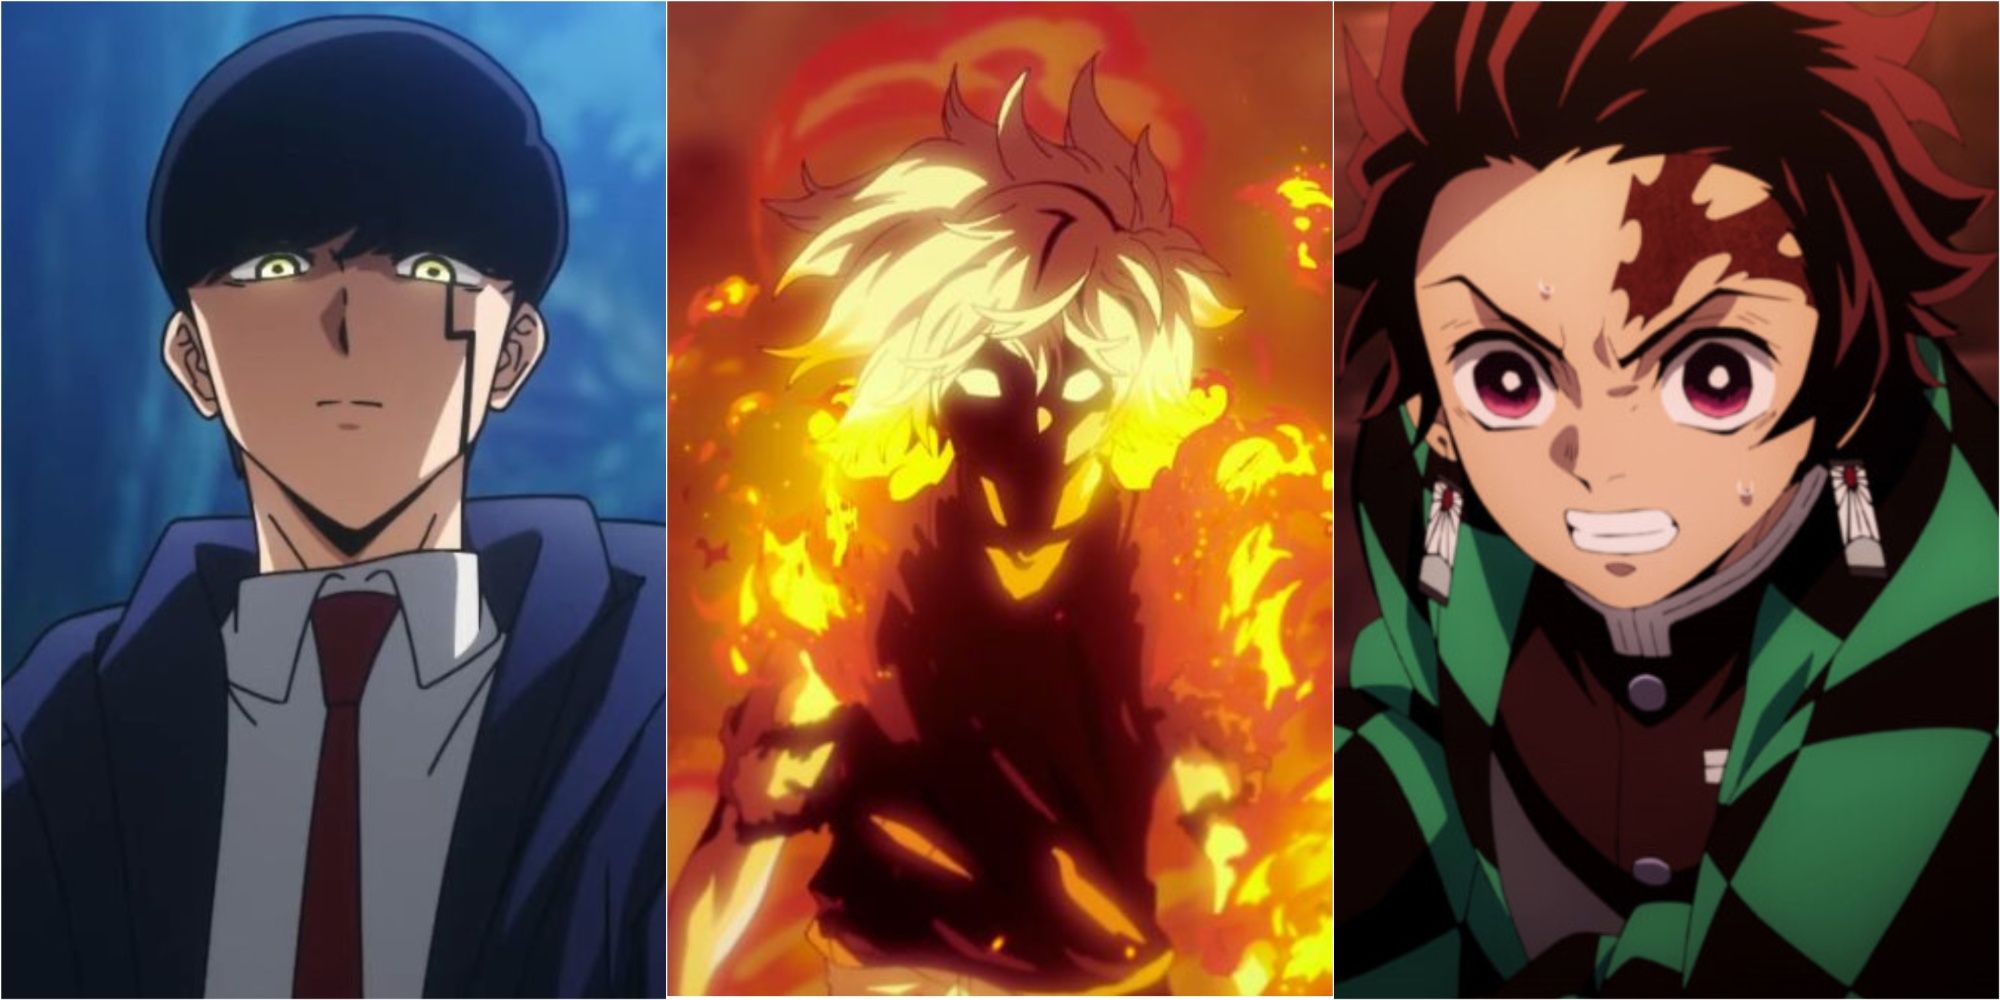 Anime Spring 2023 Guide: What To Watch, Binge, And Stream